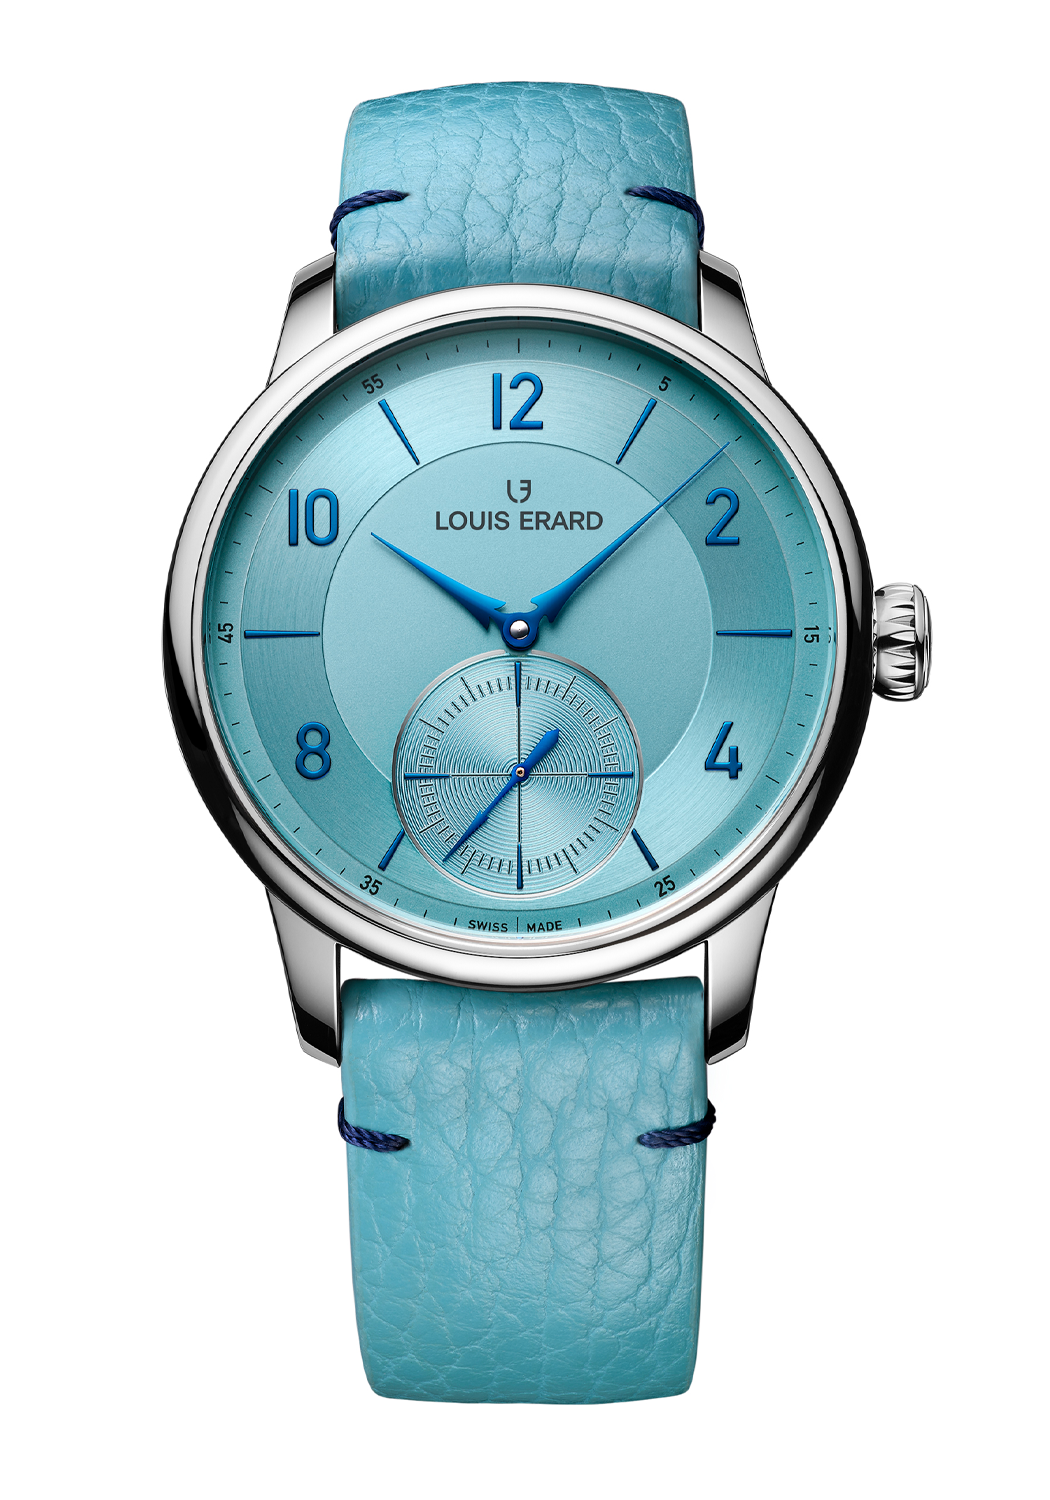 Louis Erard Excellence Petite Seconde Ice Blue | 39 mm | Ice Blue Dial | Stainless Steel | Limited Edition | Luxury Swiss Watch